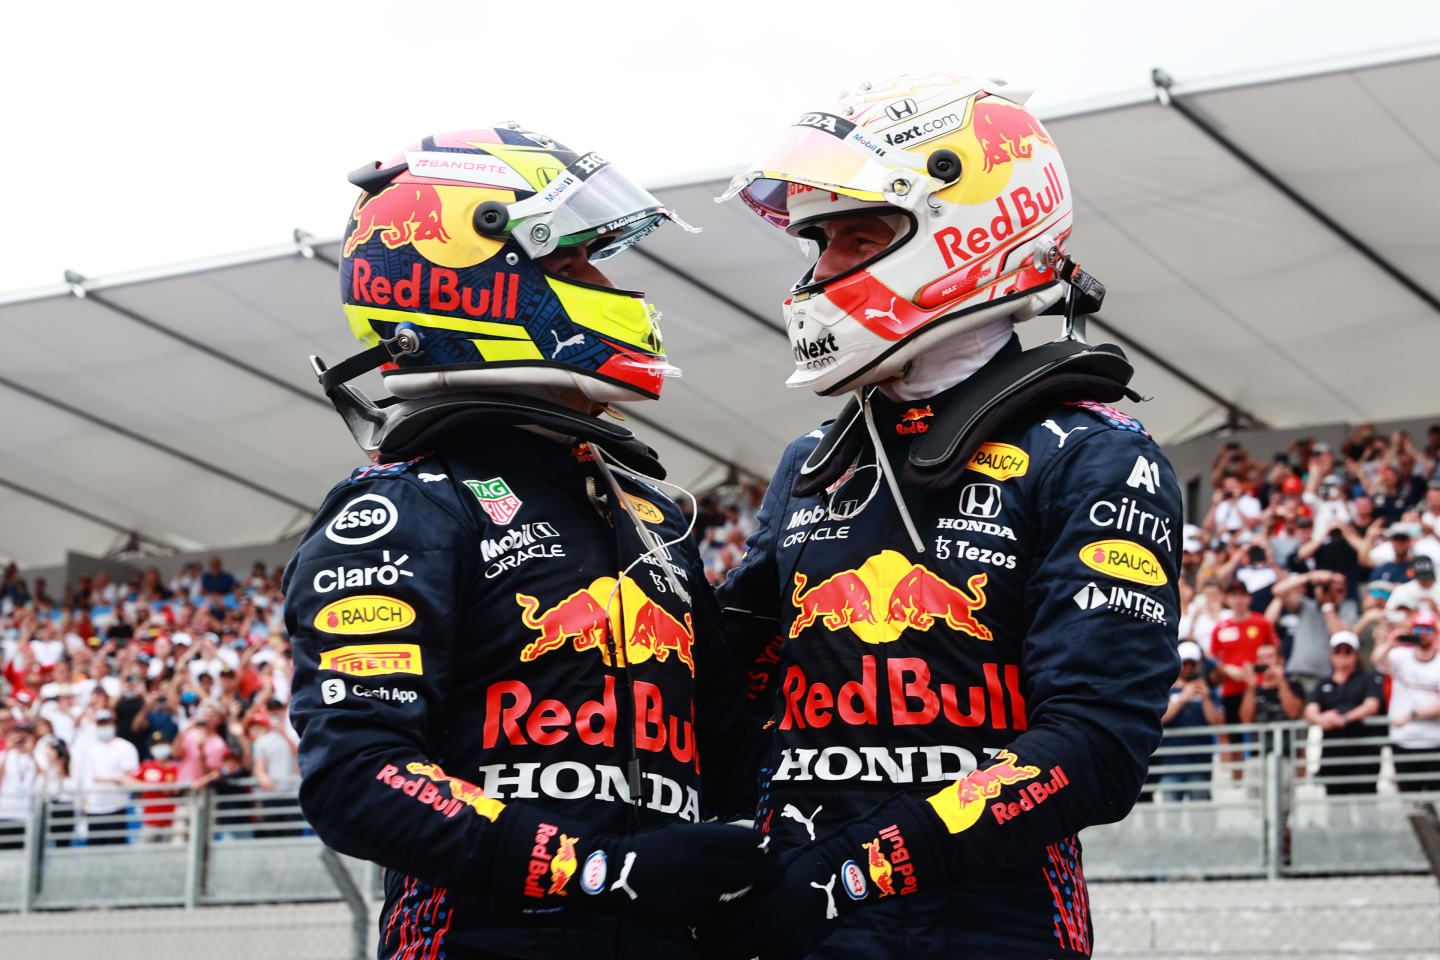 LE CASTELLET, FRANCE - JUNE 20: Race winner Max Verstappen of Netherlands and Red Bull Racing and third placed Sergio Perez of Mexico and Red Bull Racing celebrate in parc ferme during the F1 Grand Prix of France at Circuit Paul Ricard on June 20, 2021 in Le Castellet, France. (Photo by Mark Thompson/Getty Images)